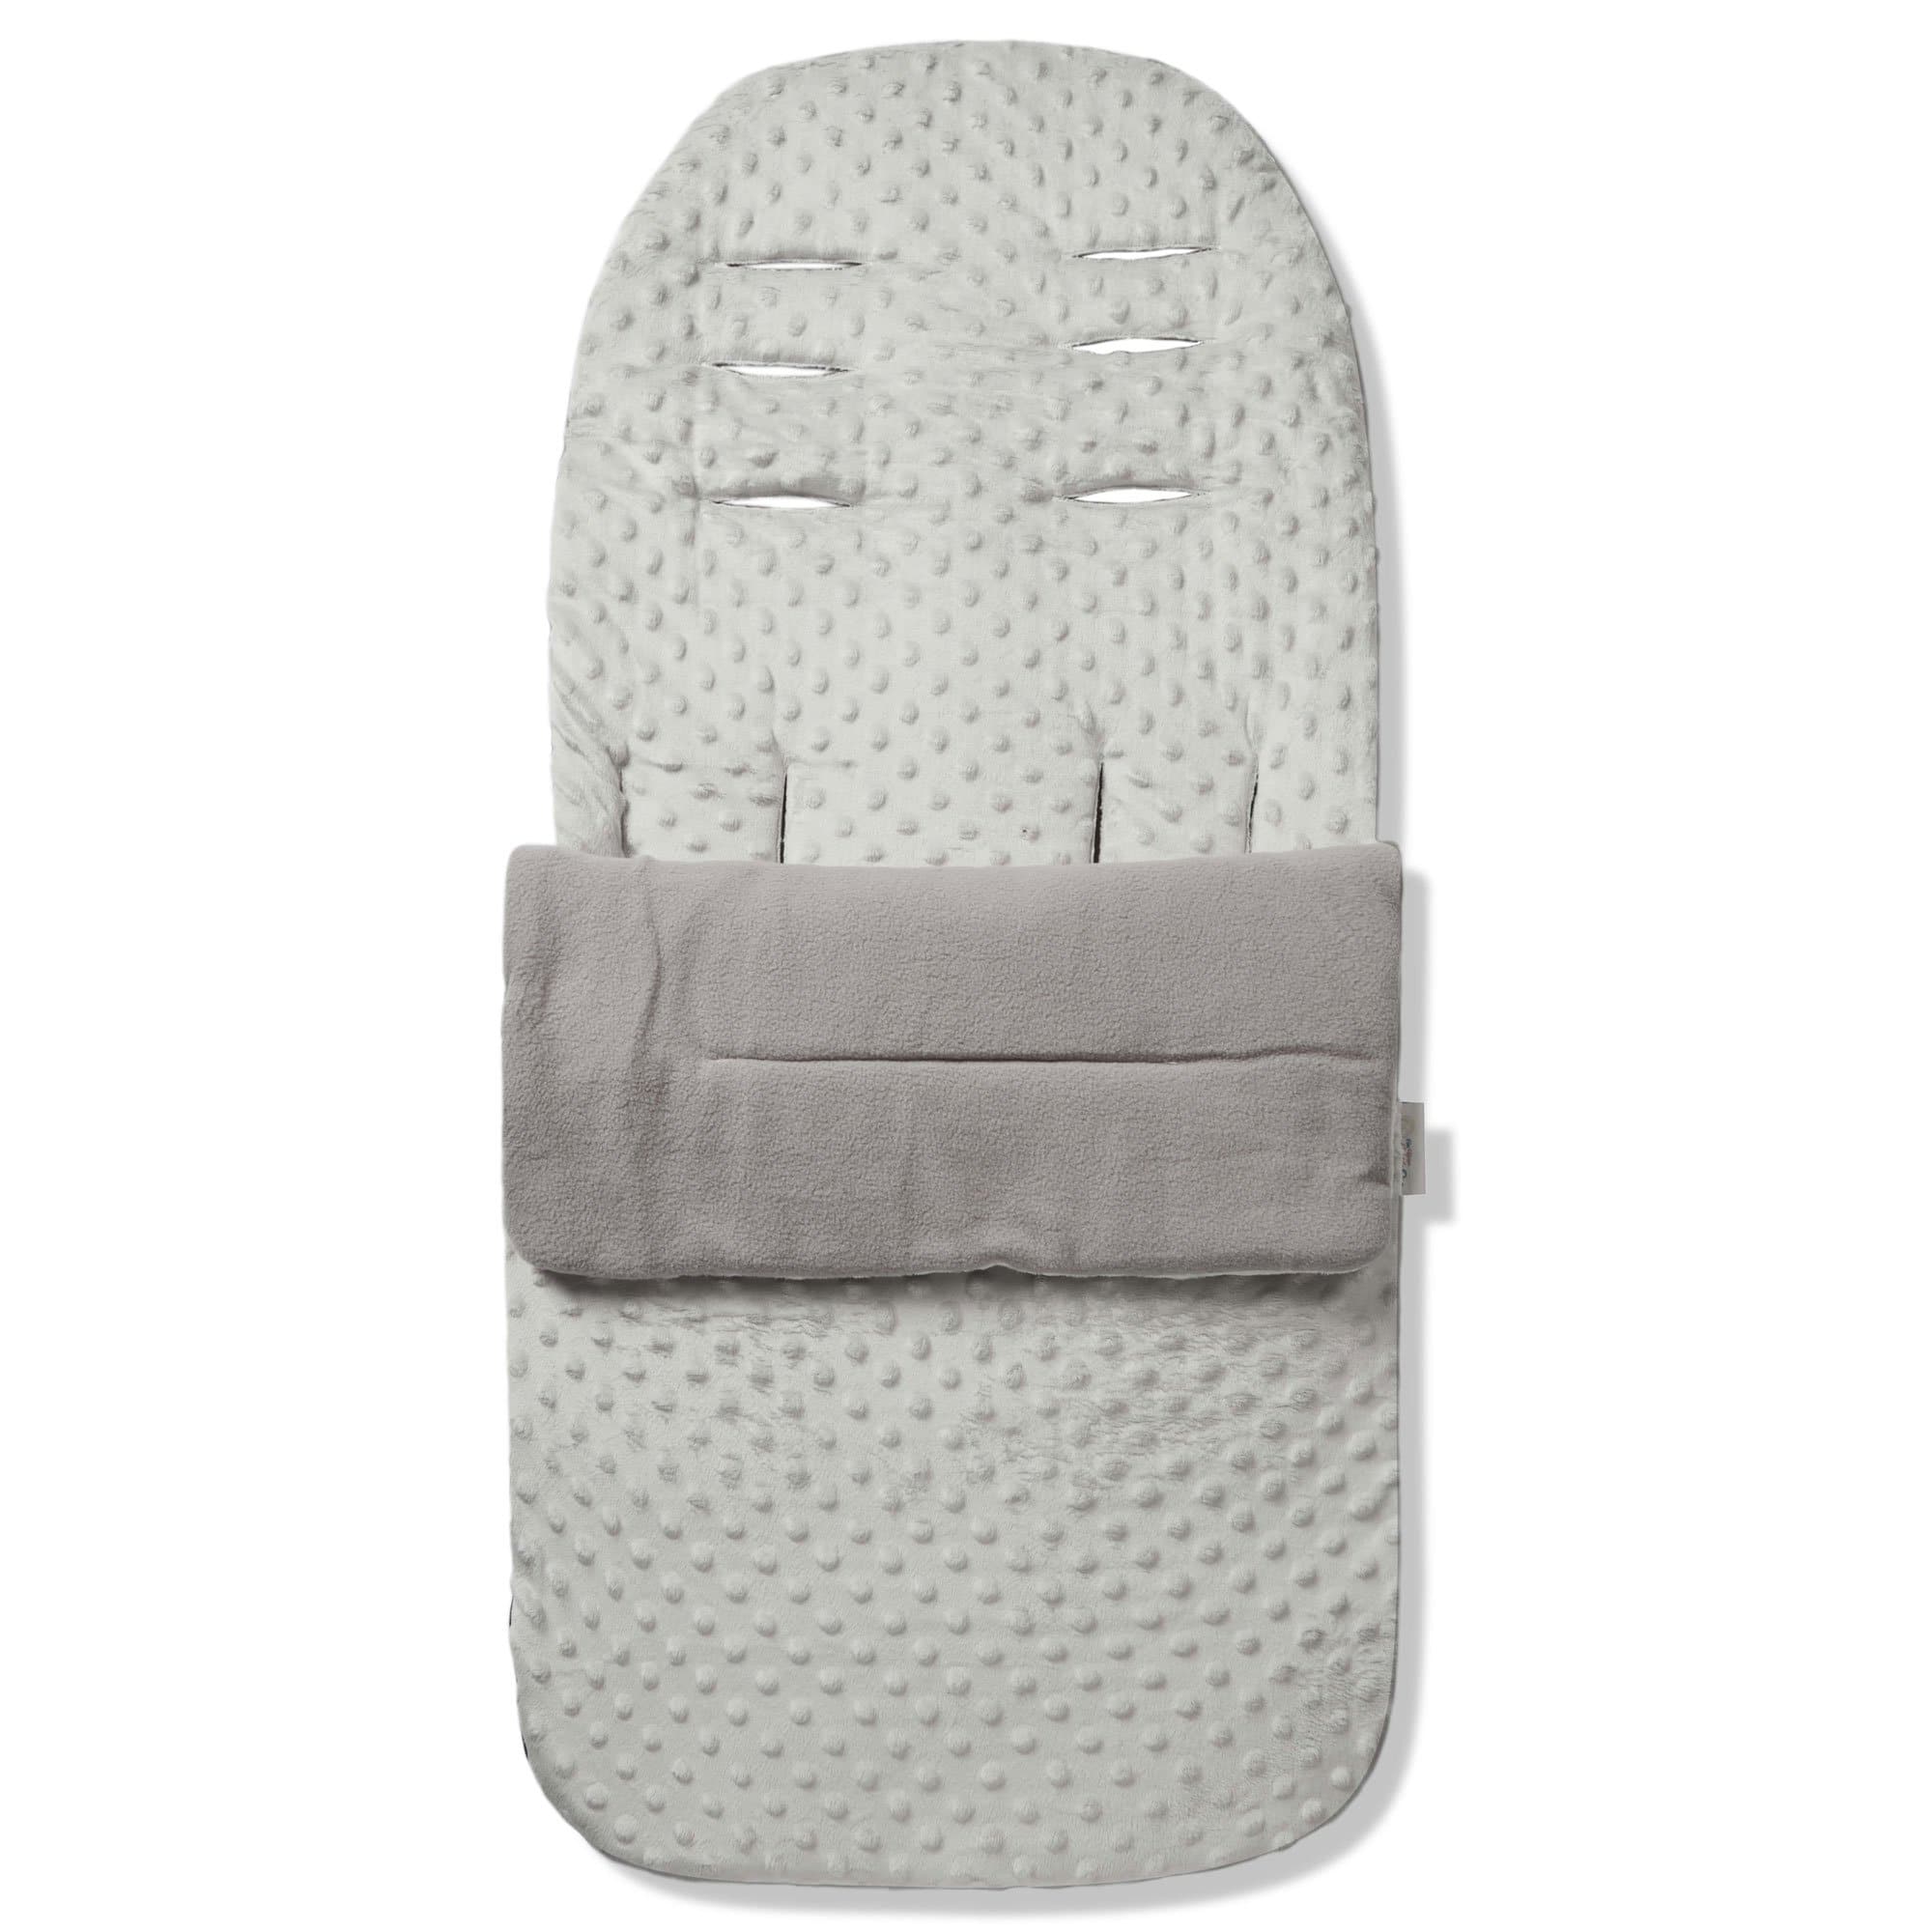 Dimple Footmuff / Cosy Toes Compatible with Babyzen - Grey / Fits All Models | For Your Little One